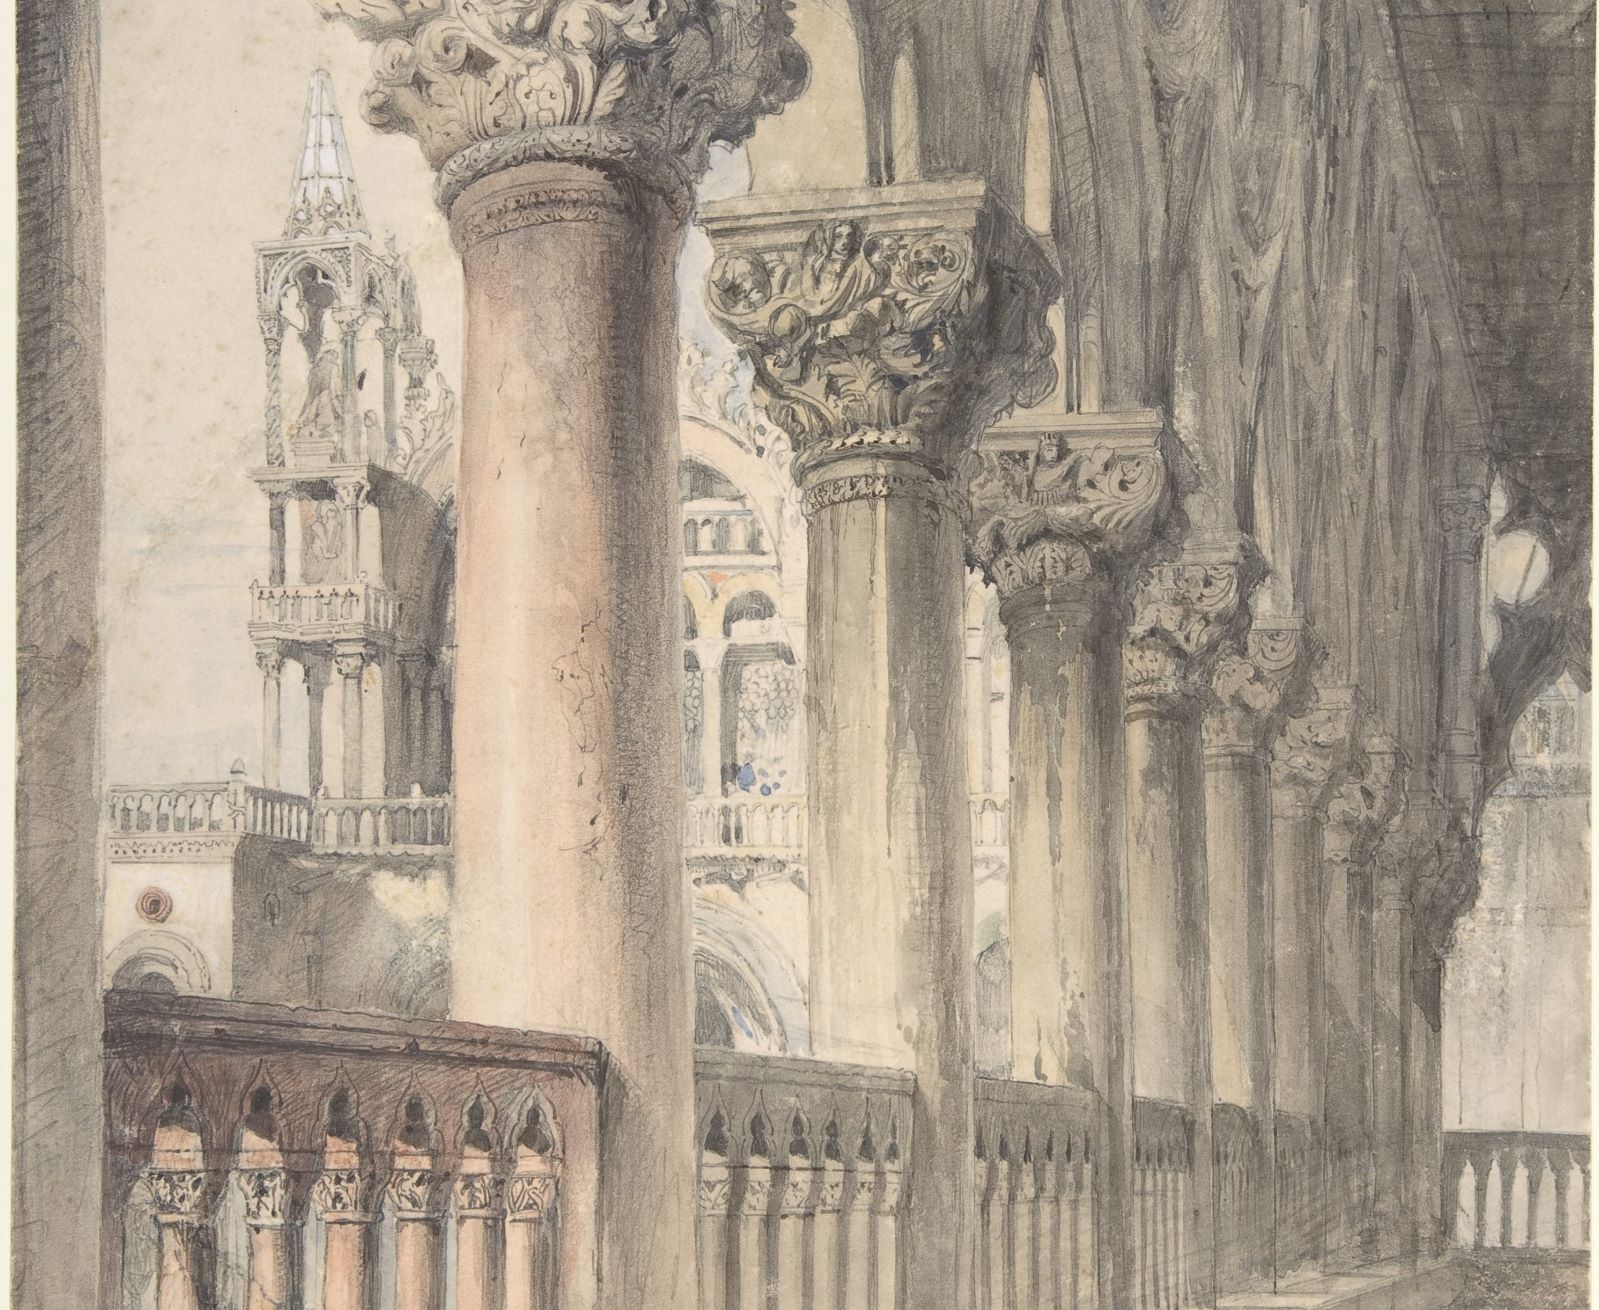 Voices from Venice - 4th of 4 readings from John Ruskin's writing on Venice